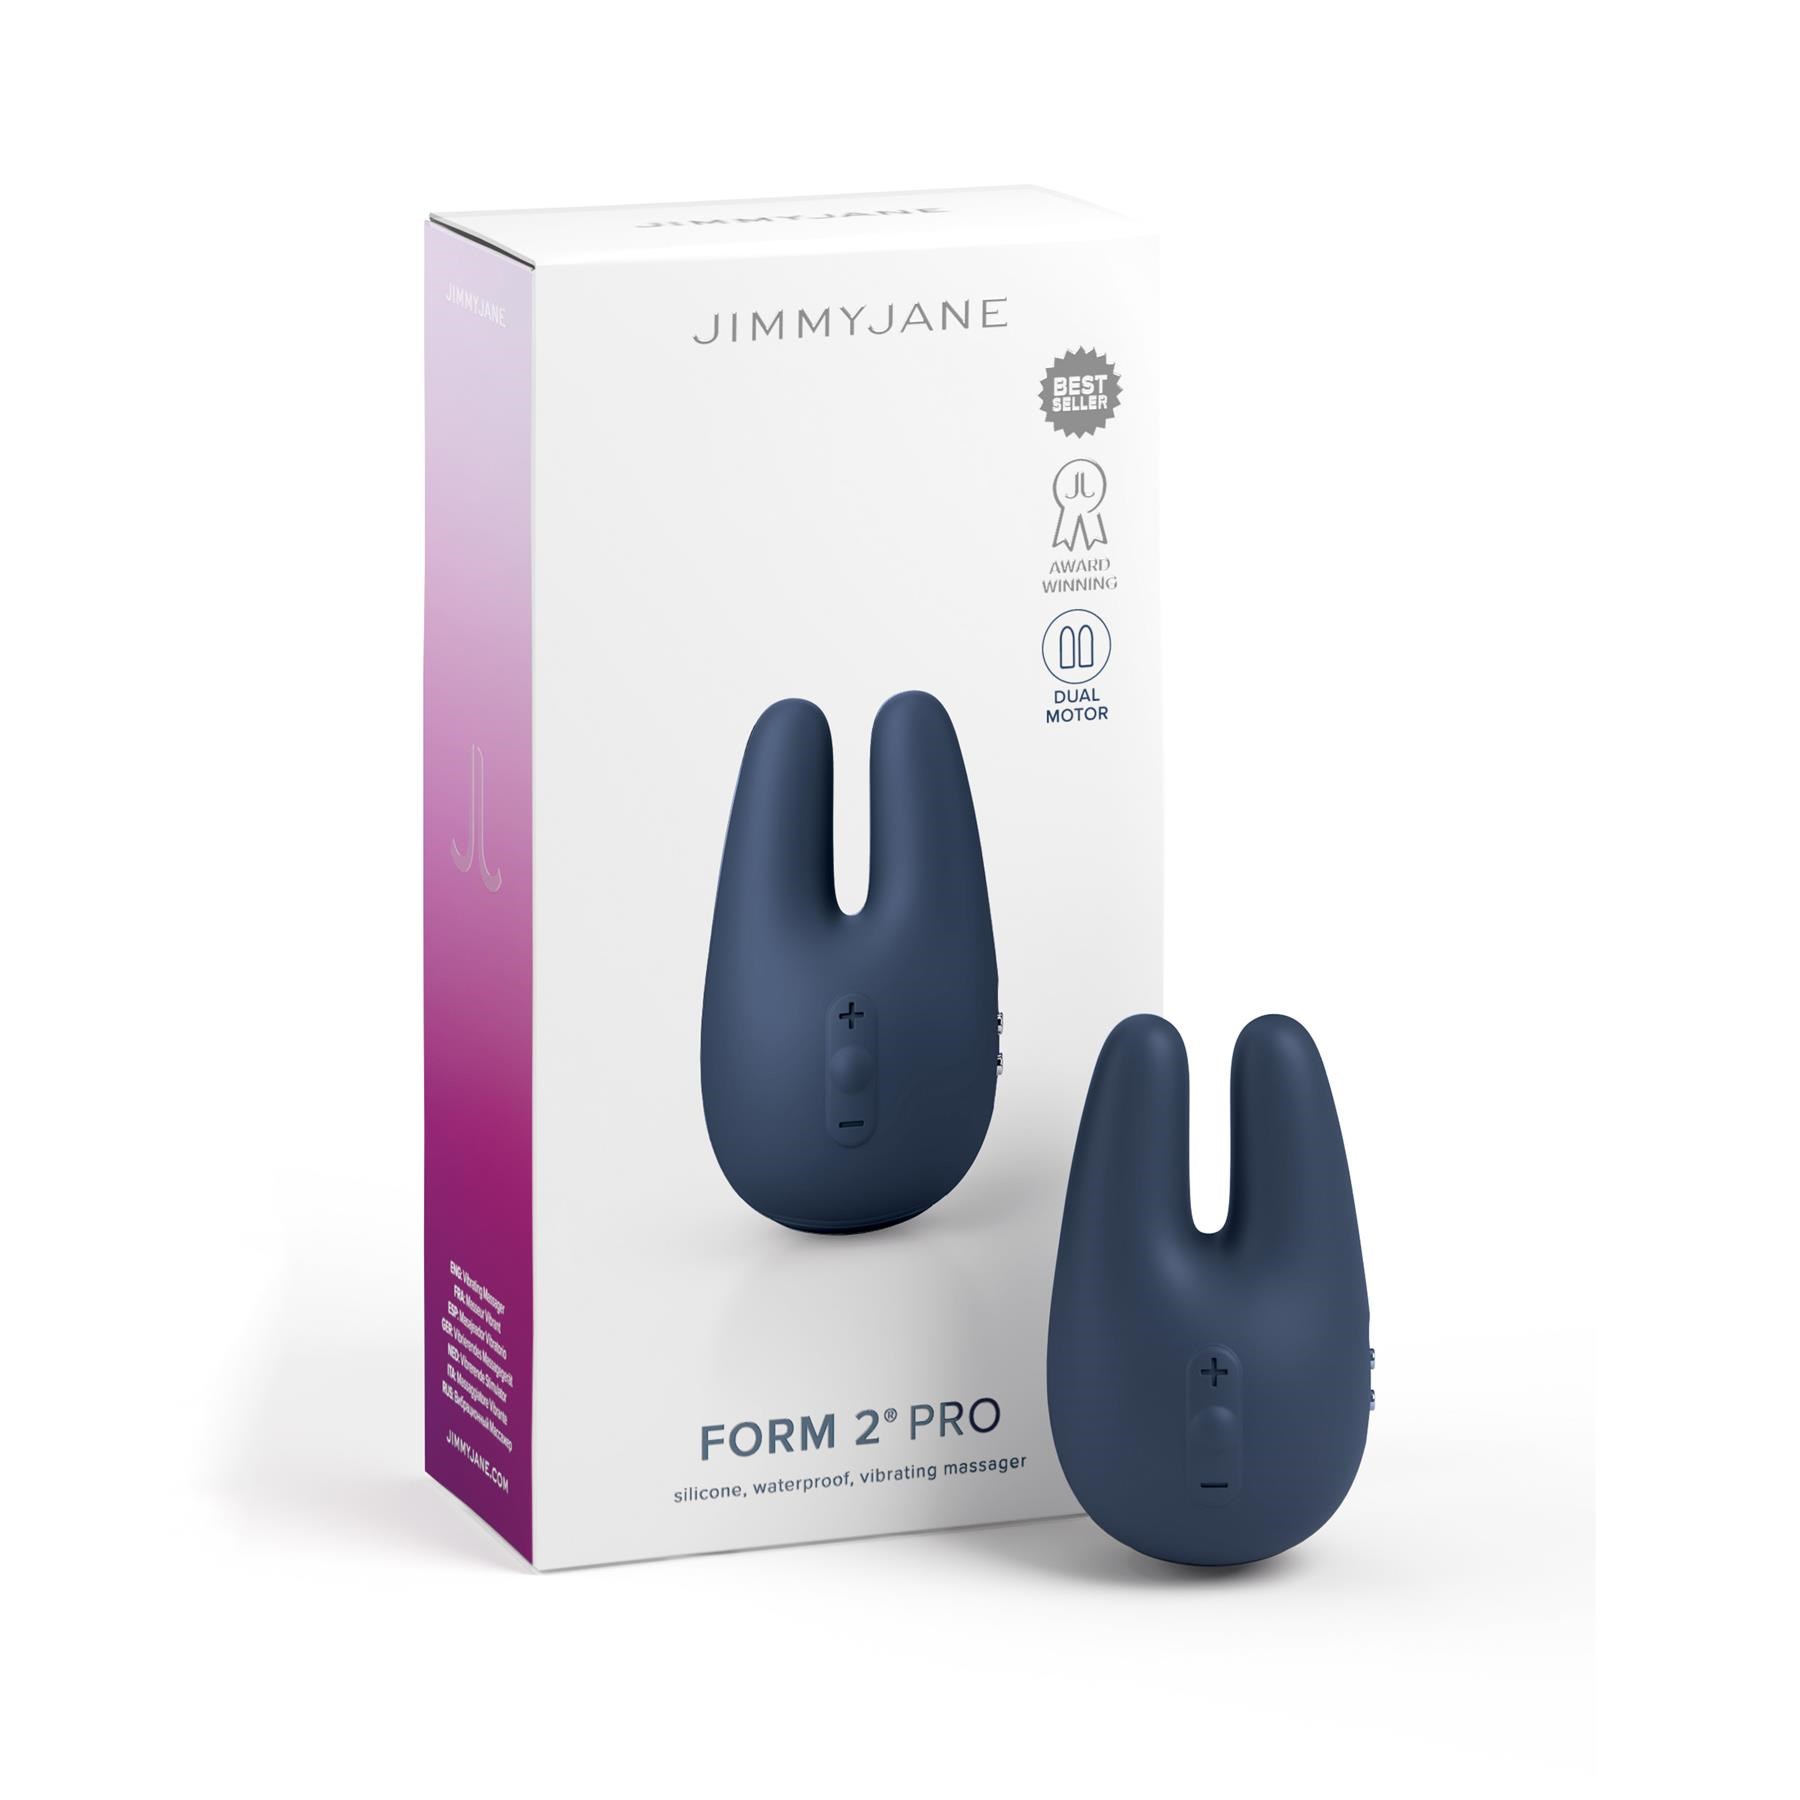 Jimmy Jane Form 2 Pro Vibrator - Product and Packaging